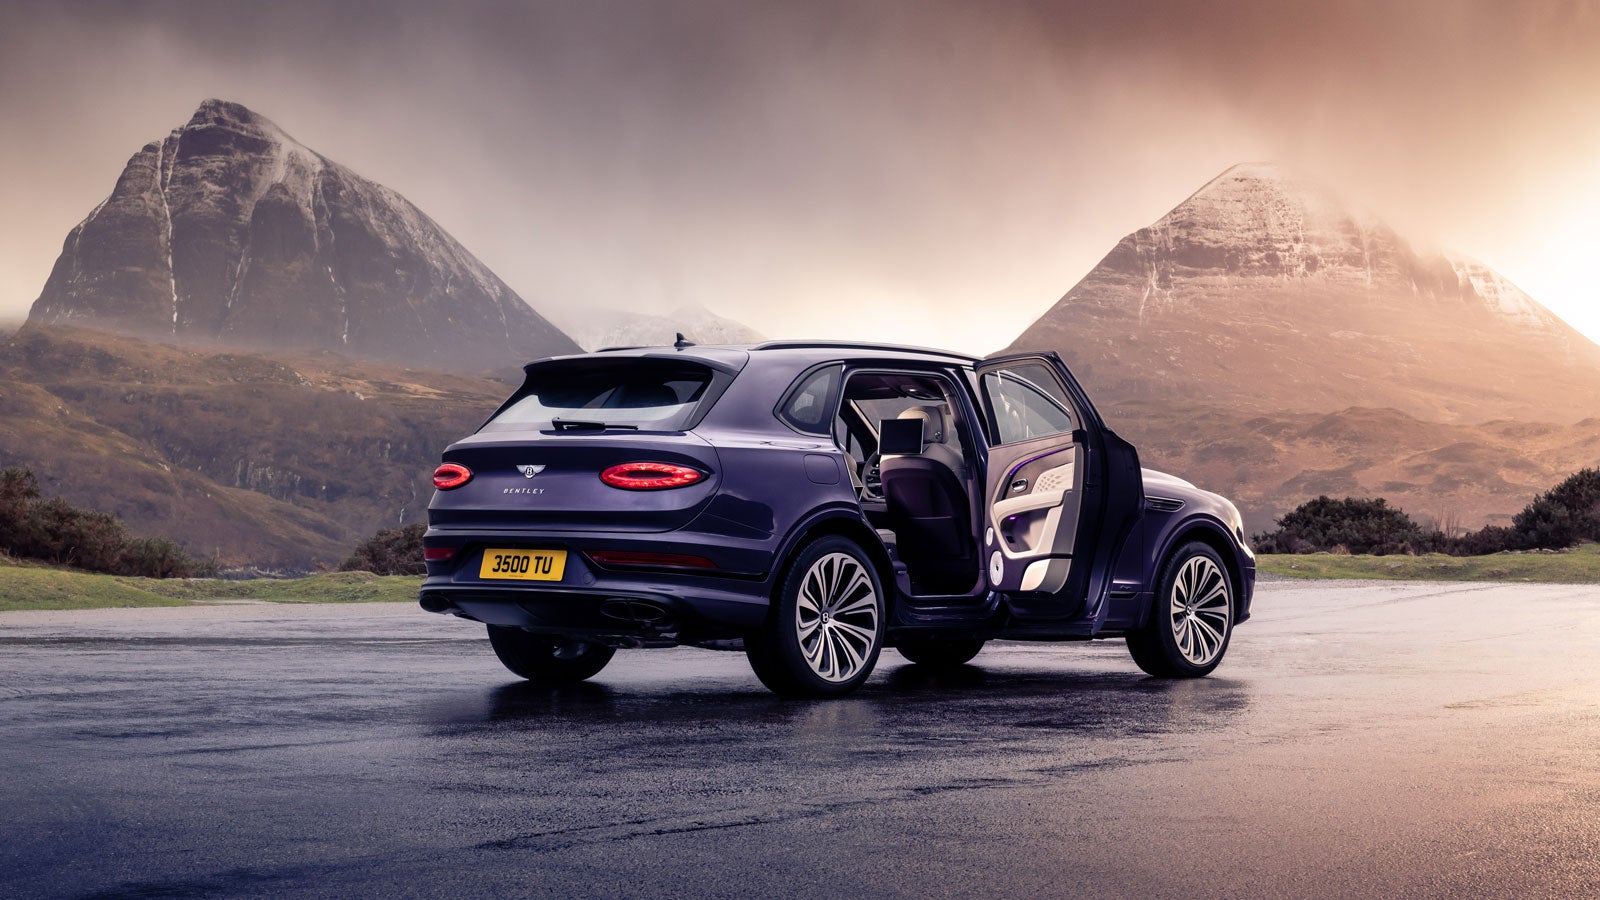 The Bentley Bentayga Extended Wheelbase Will Monitor Your Back Sweat to Keep You Comfortable